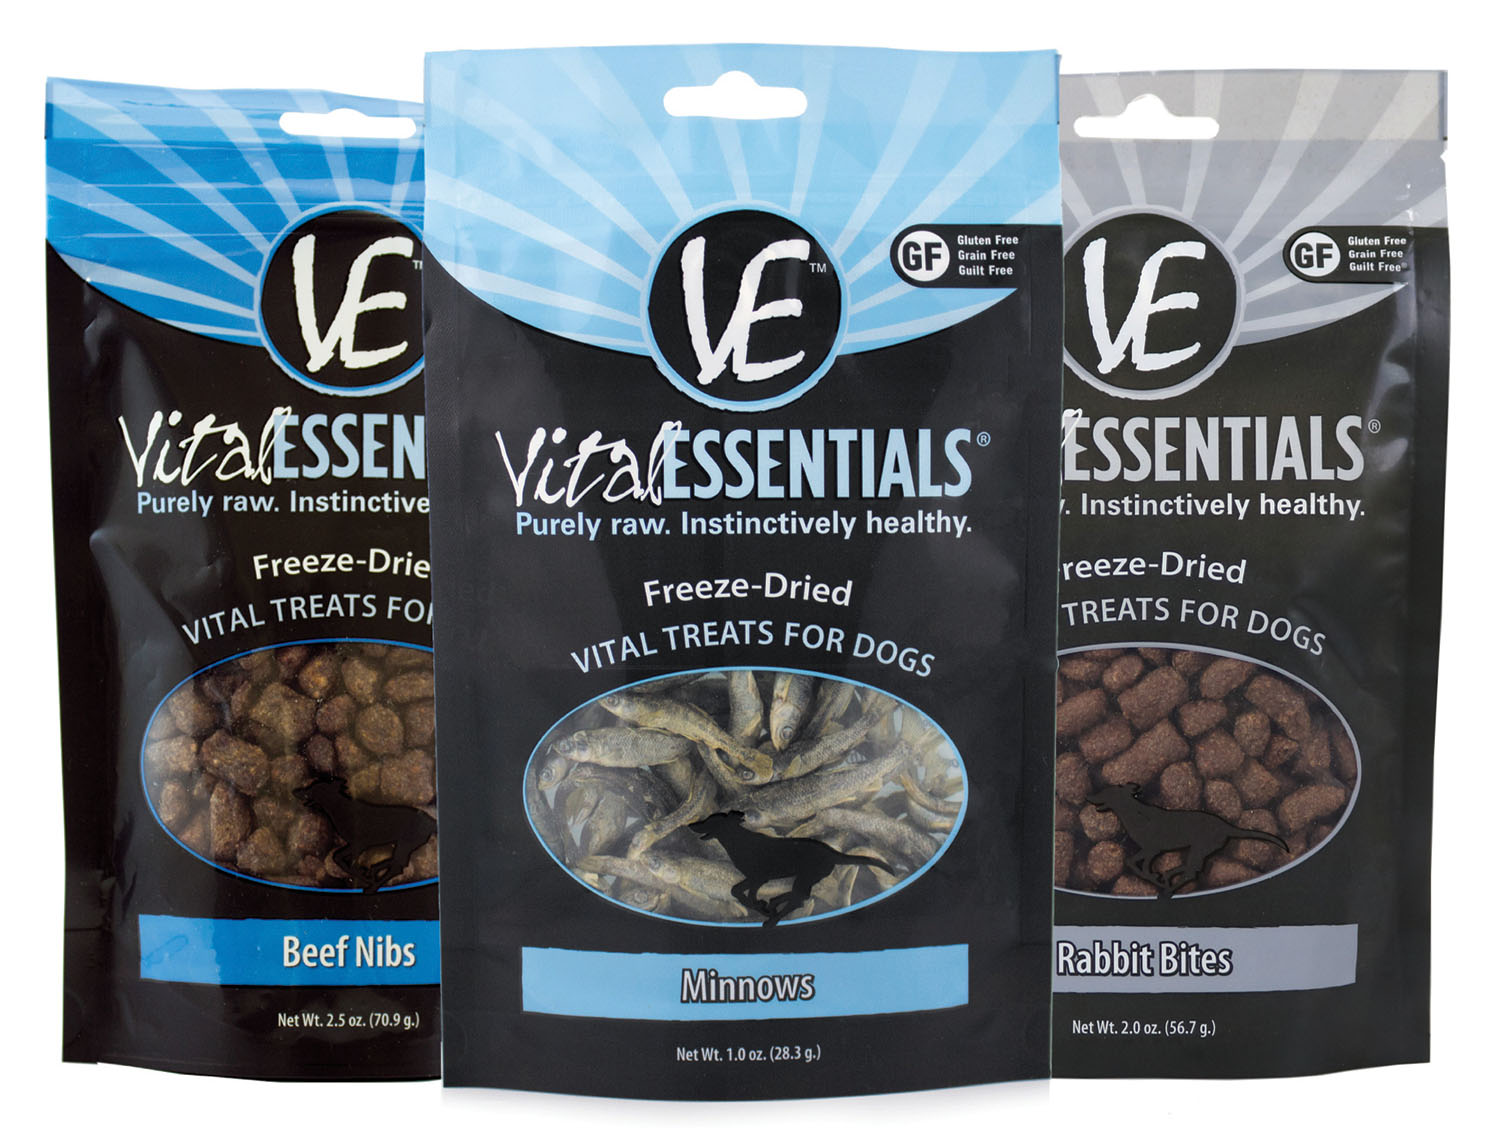 Vital Essentials uses on-trend callouts to stand-out in the pet food aisle